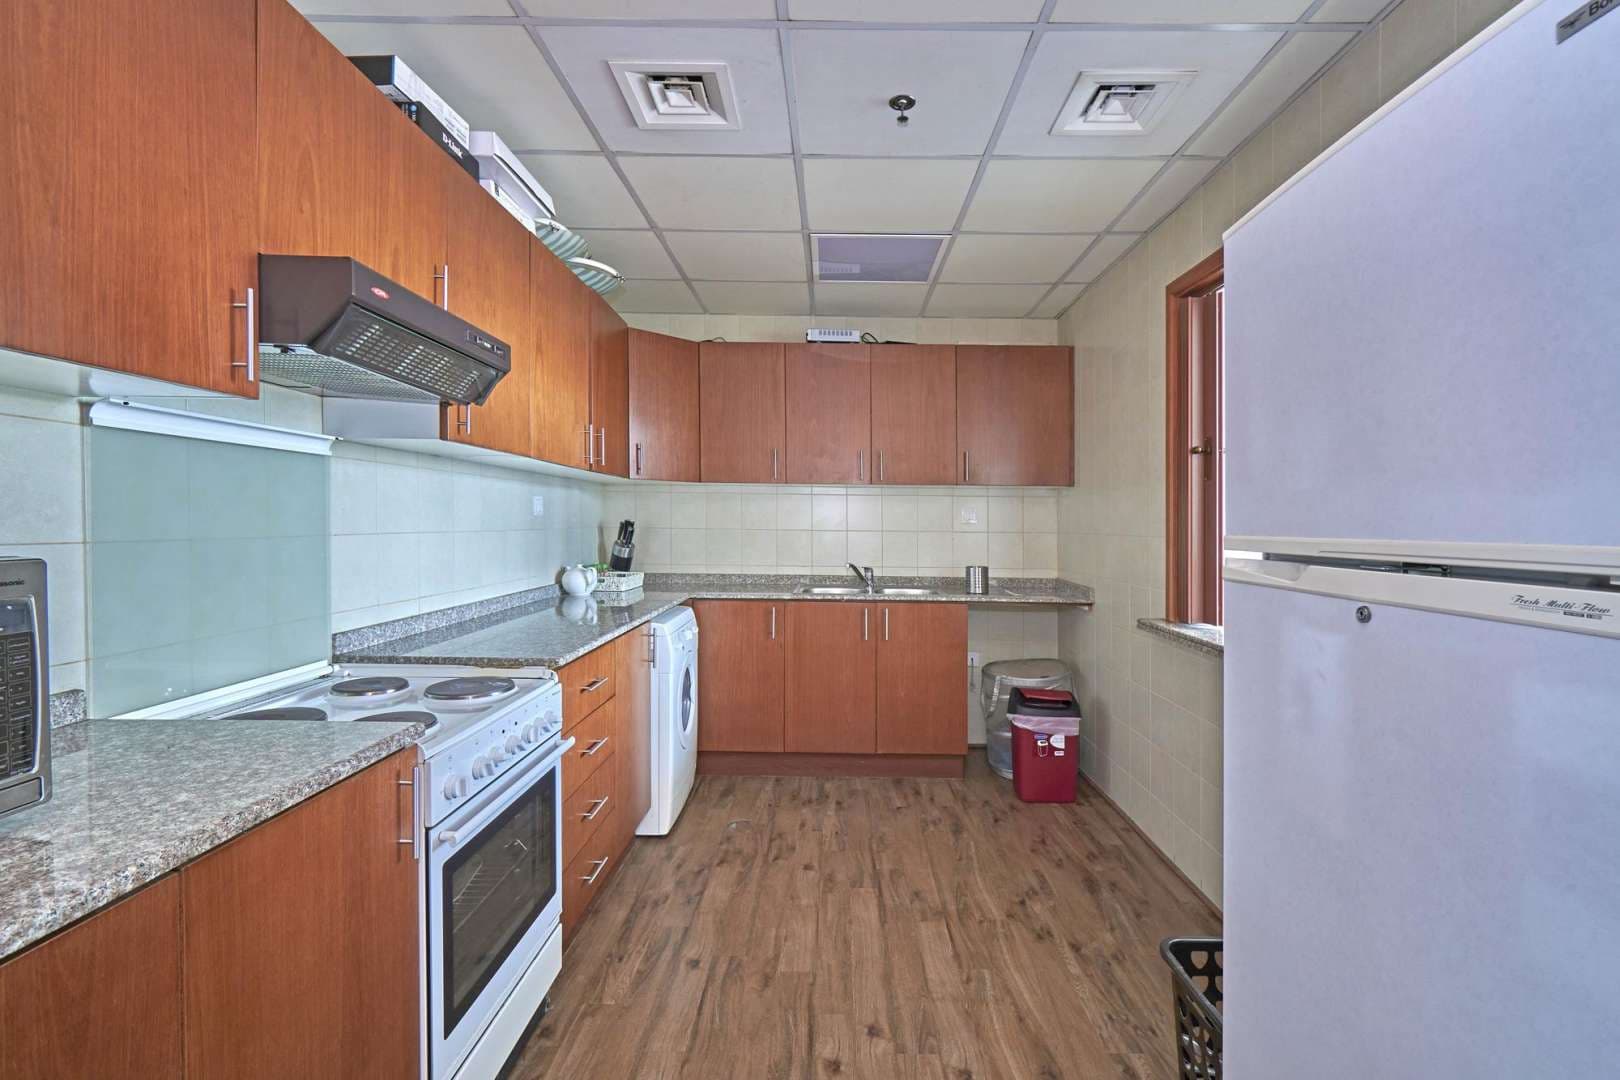 2 Bedroom Apartment For Rent Mag 218 Tower Lp05532 117dfcdb8615190.jpg